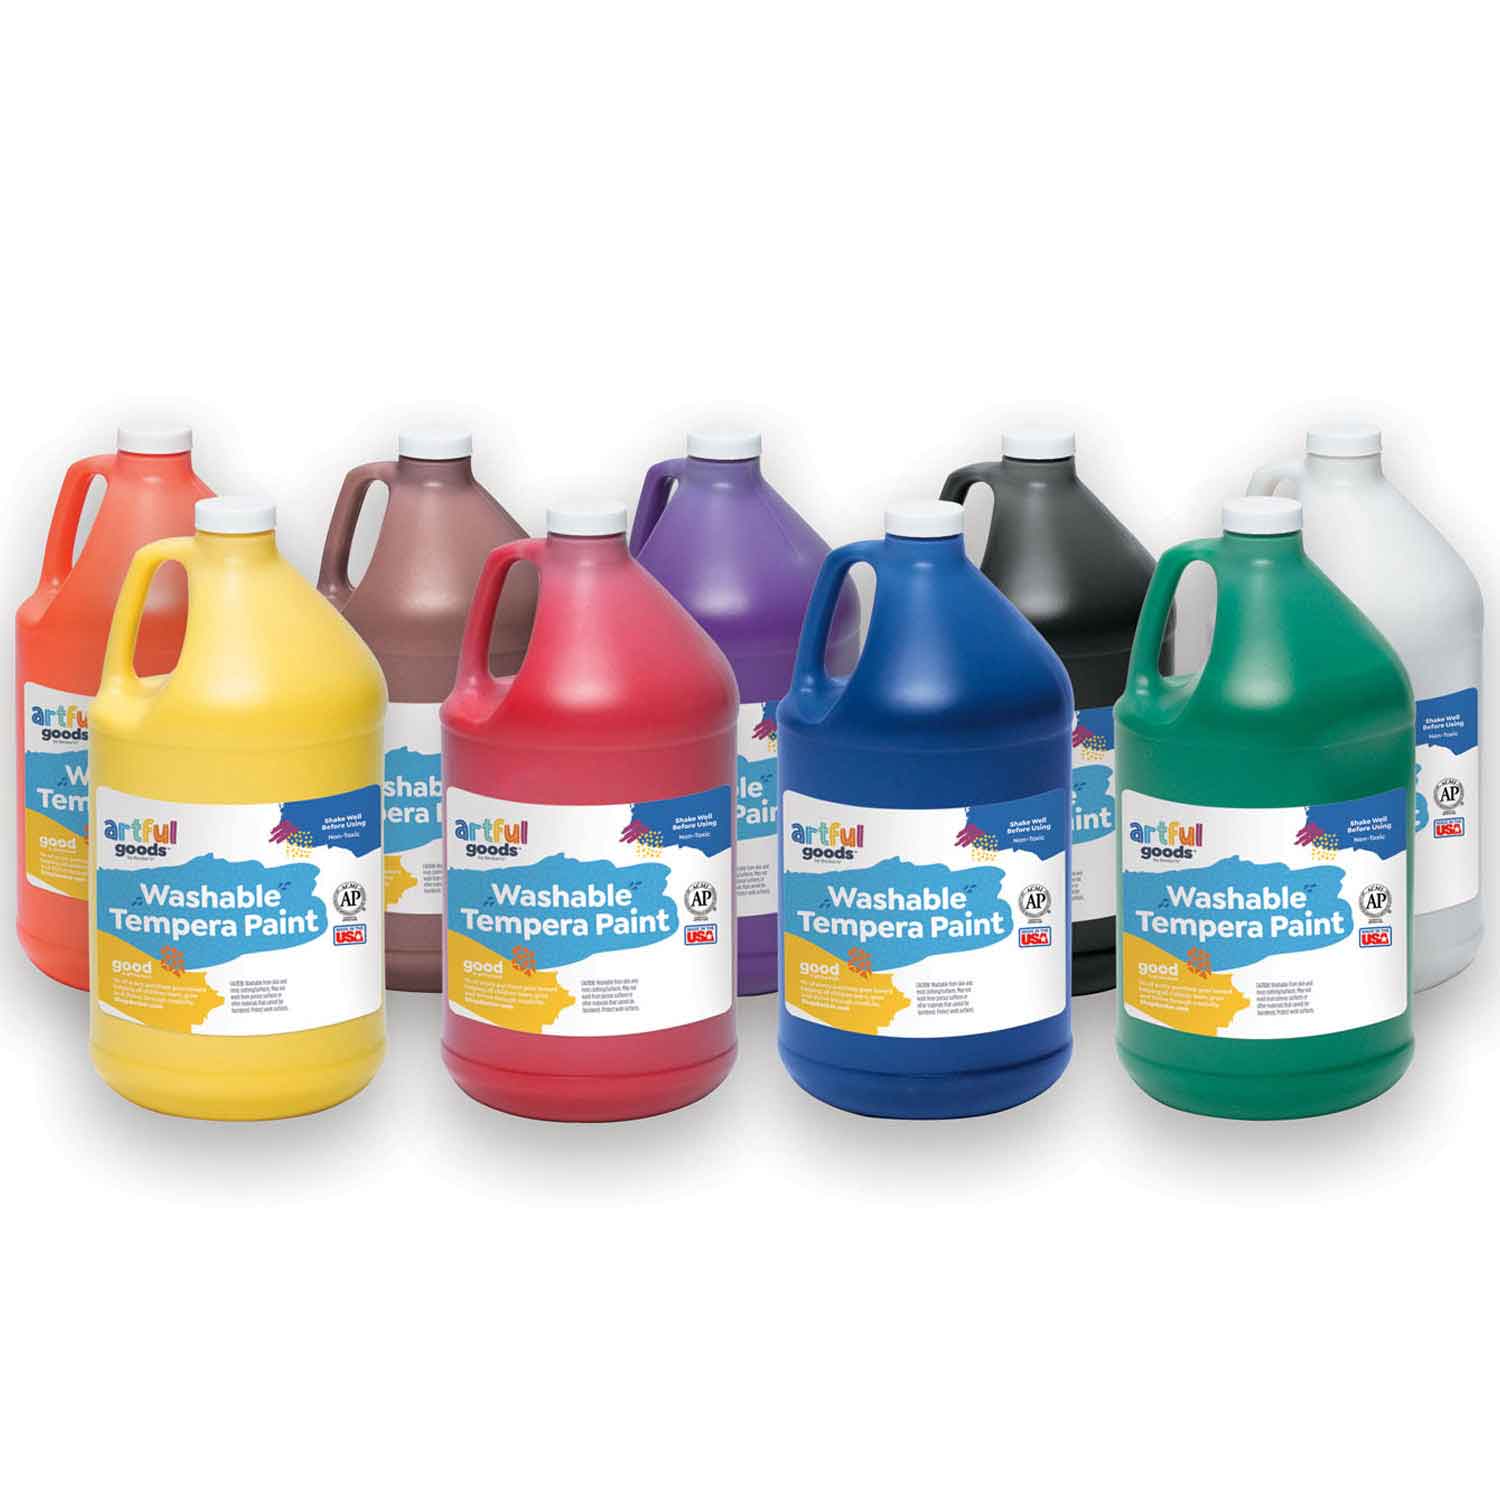 J MARK Complete Toddler Washable Finger Paint Set, Large Finger Paint Pad,  Tempera Finger Paints, Smock and More